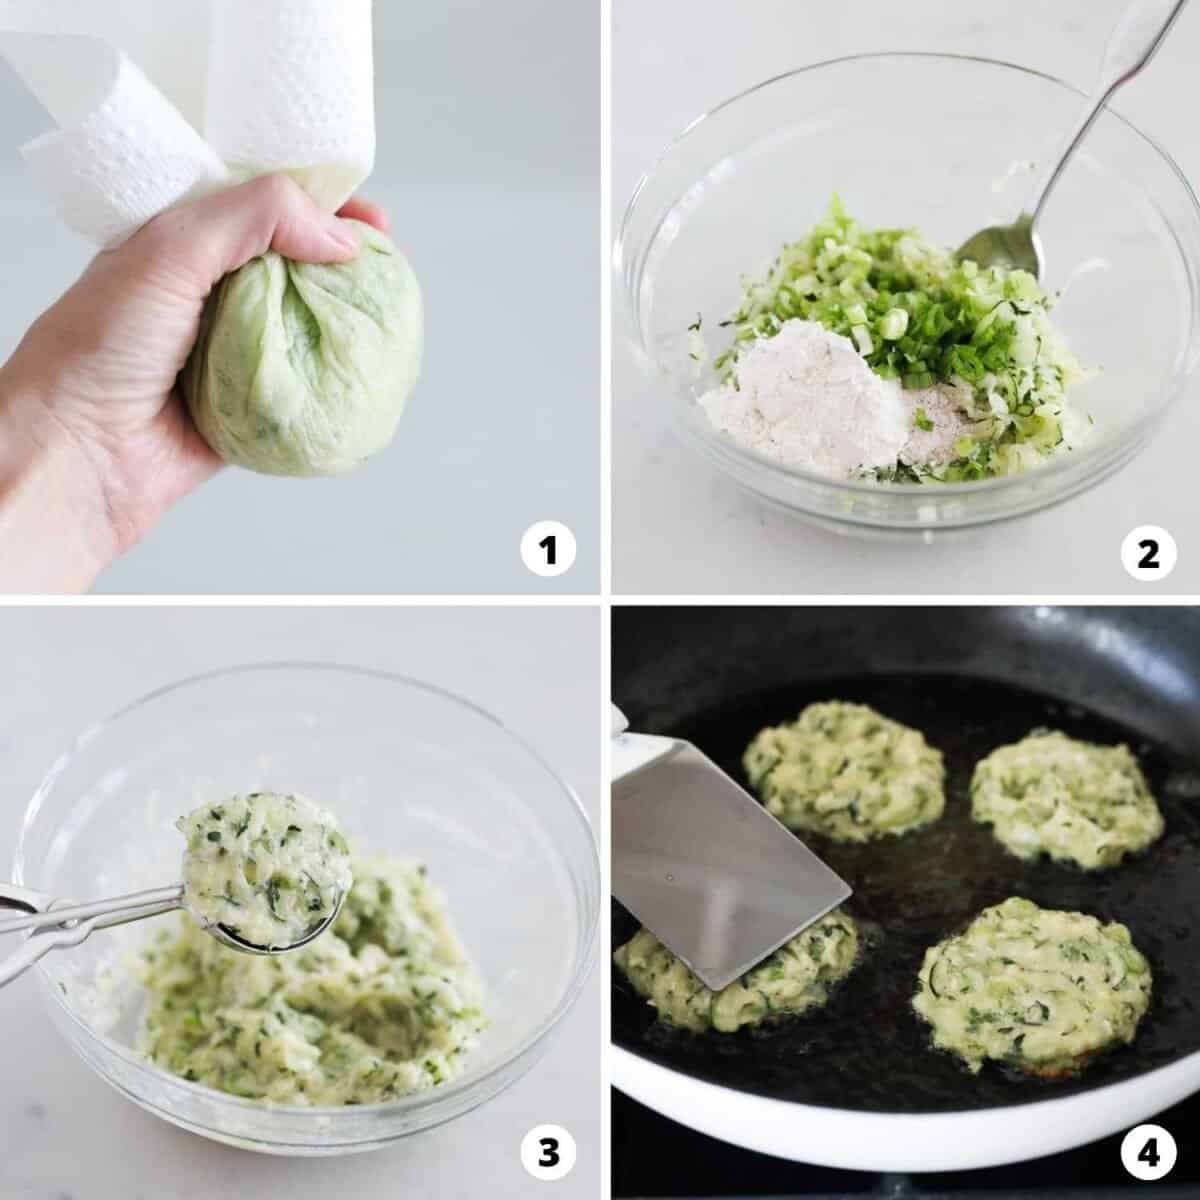 Step by step making zucchini fritters.